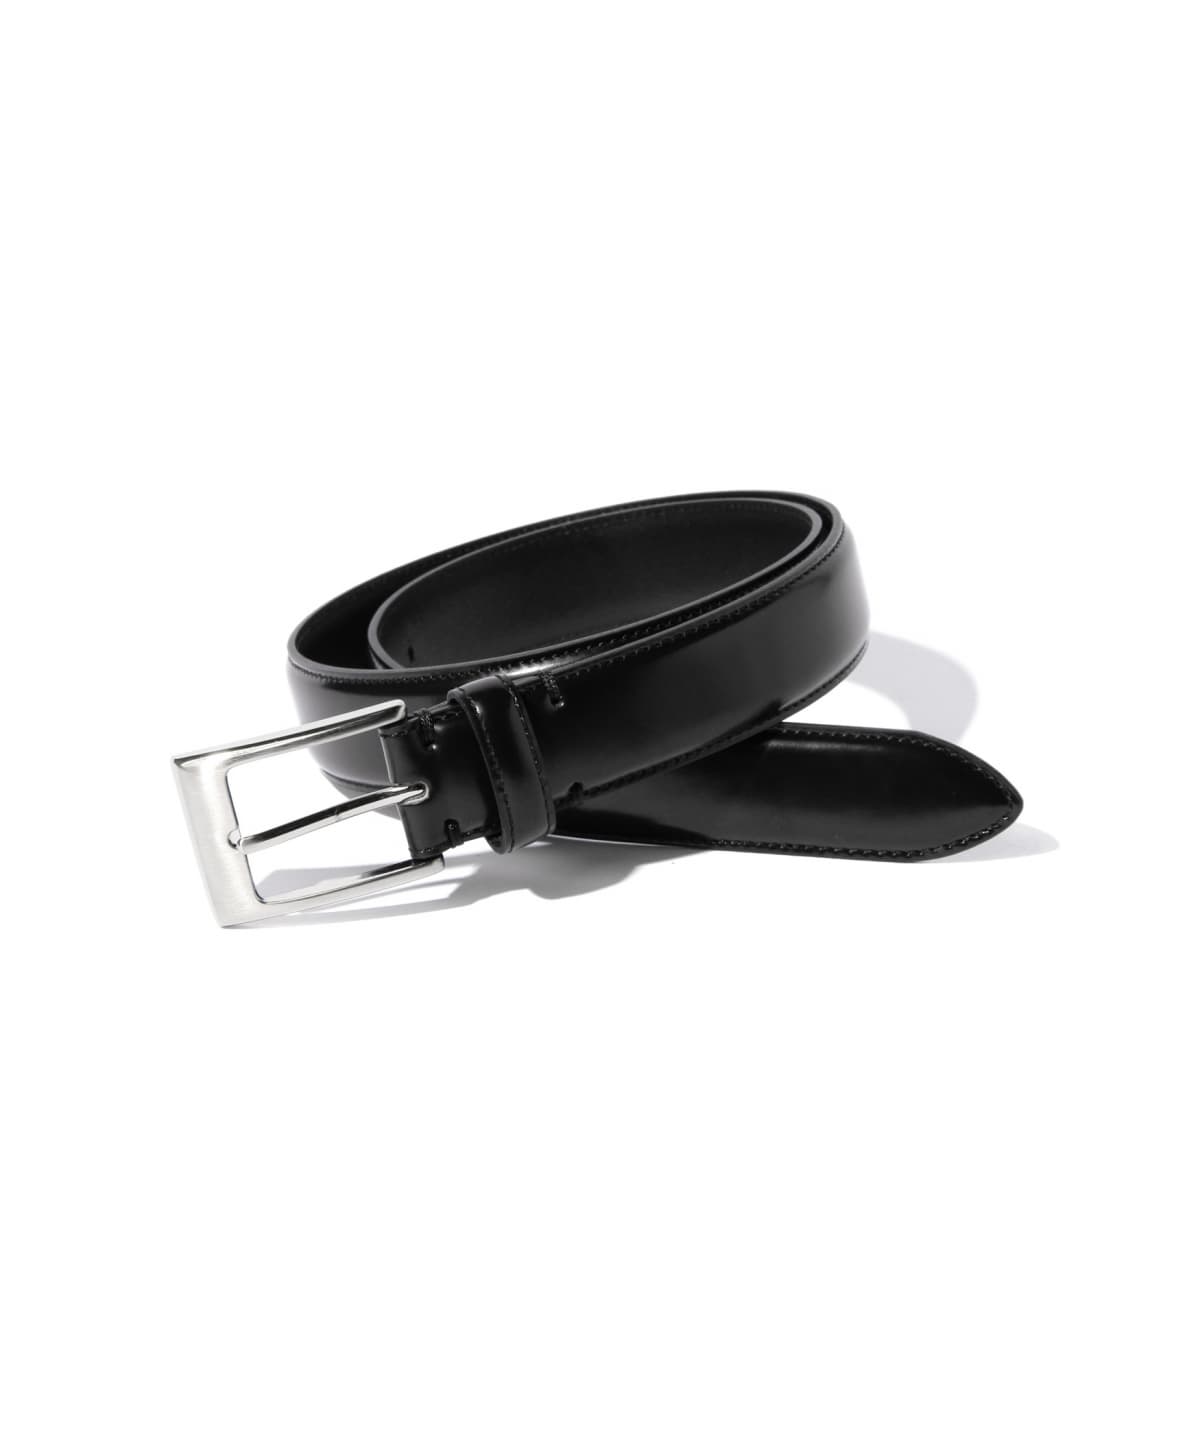 BEAMS BEAMS / Soft glass leather belt (fashion miscellaneous goods 